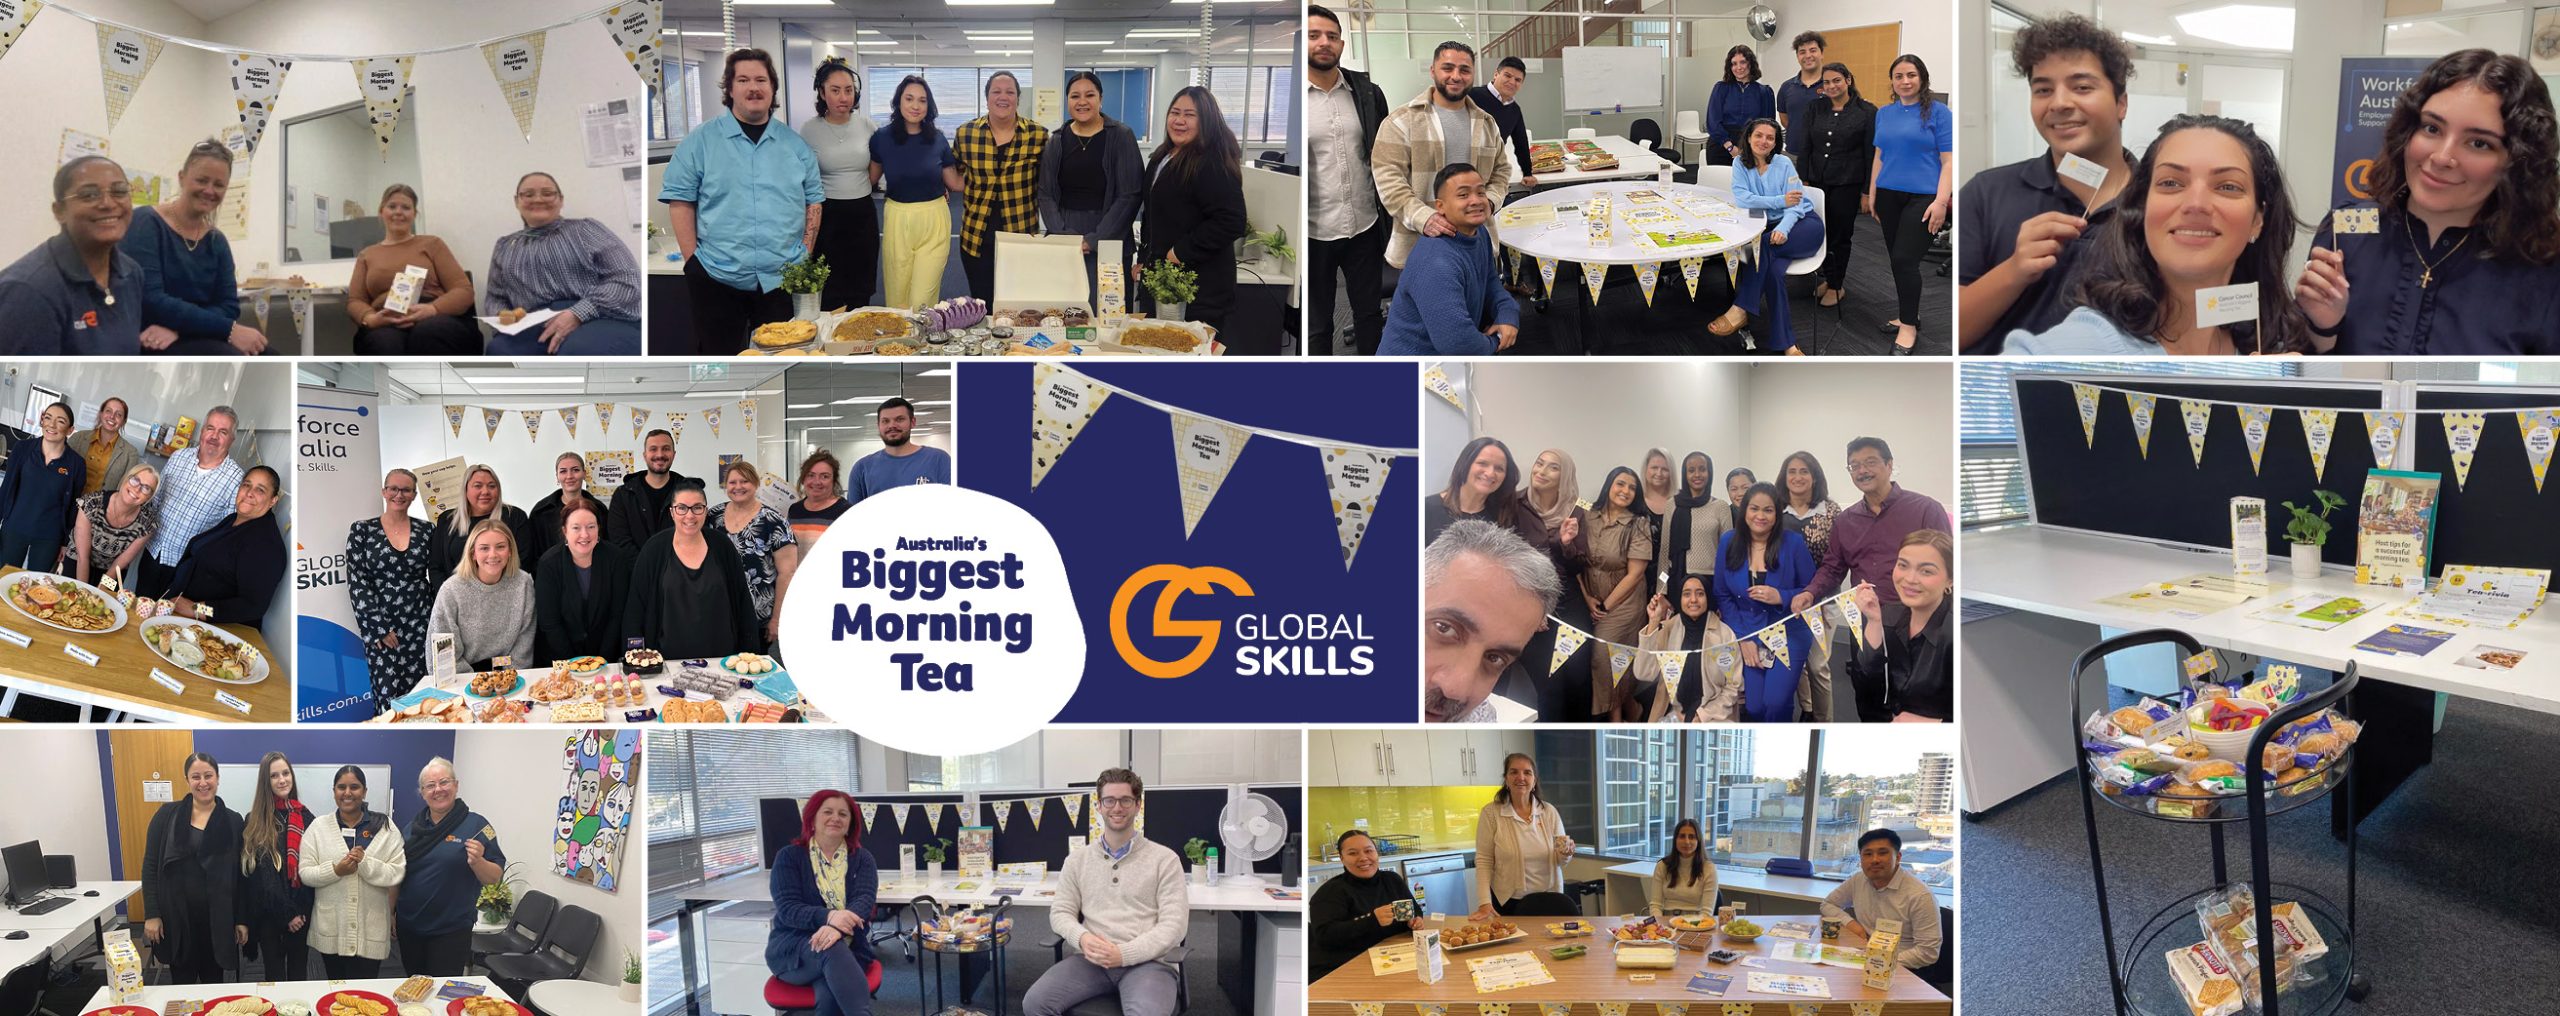 a collage including groups of a group of Global Skills staff with food and Biggest Morning Tea decorations